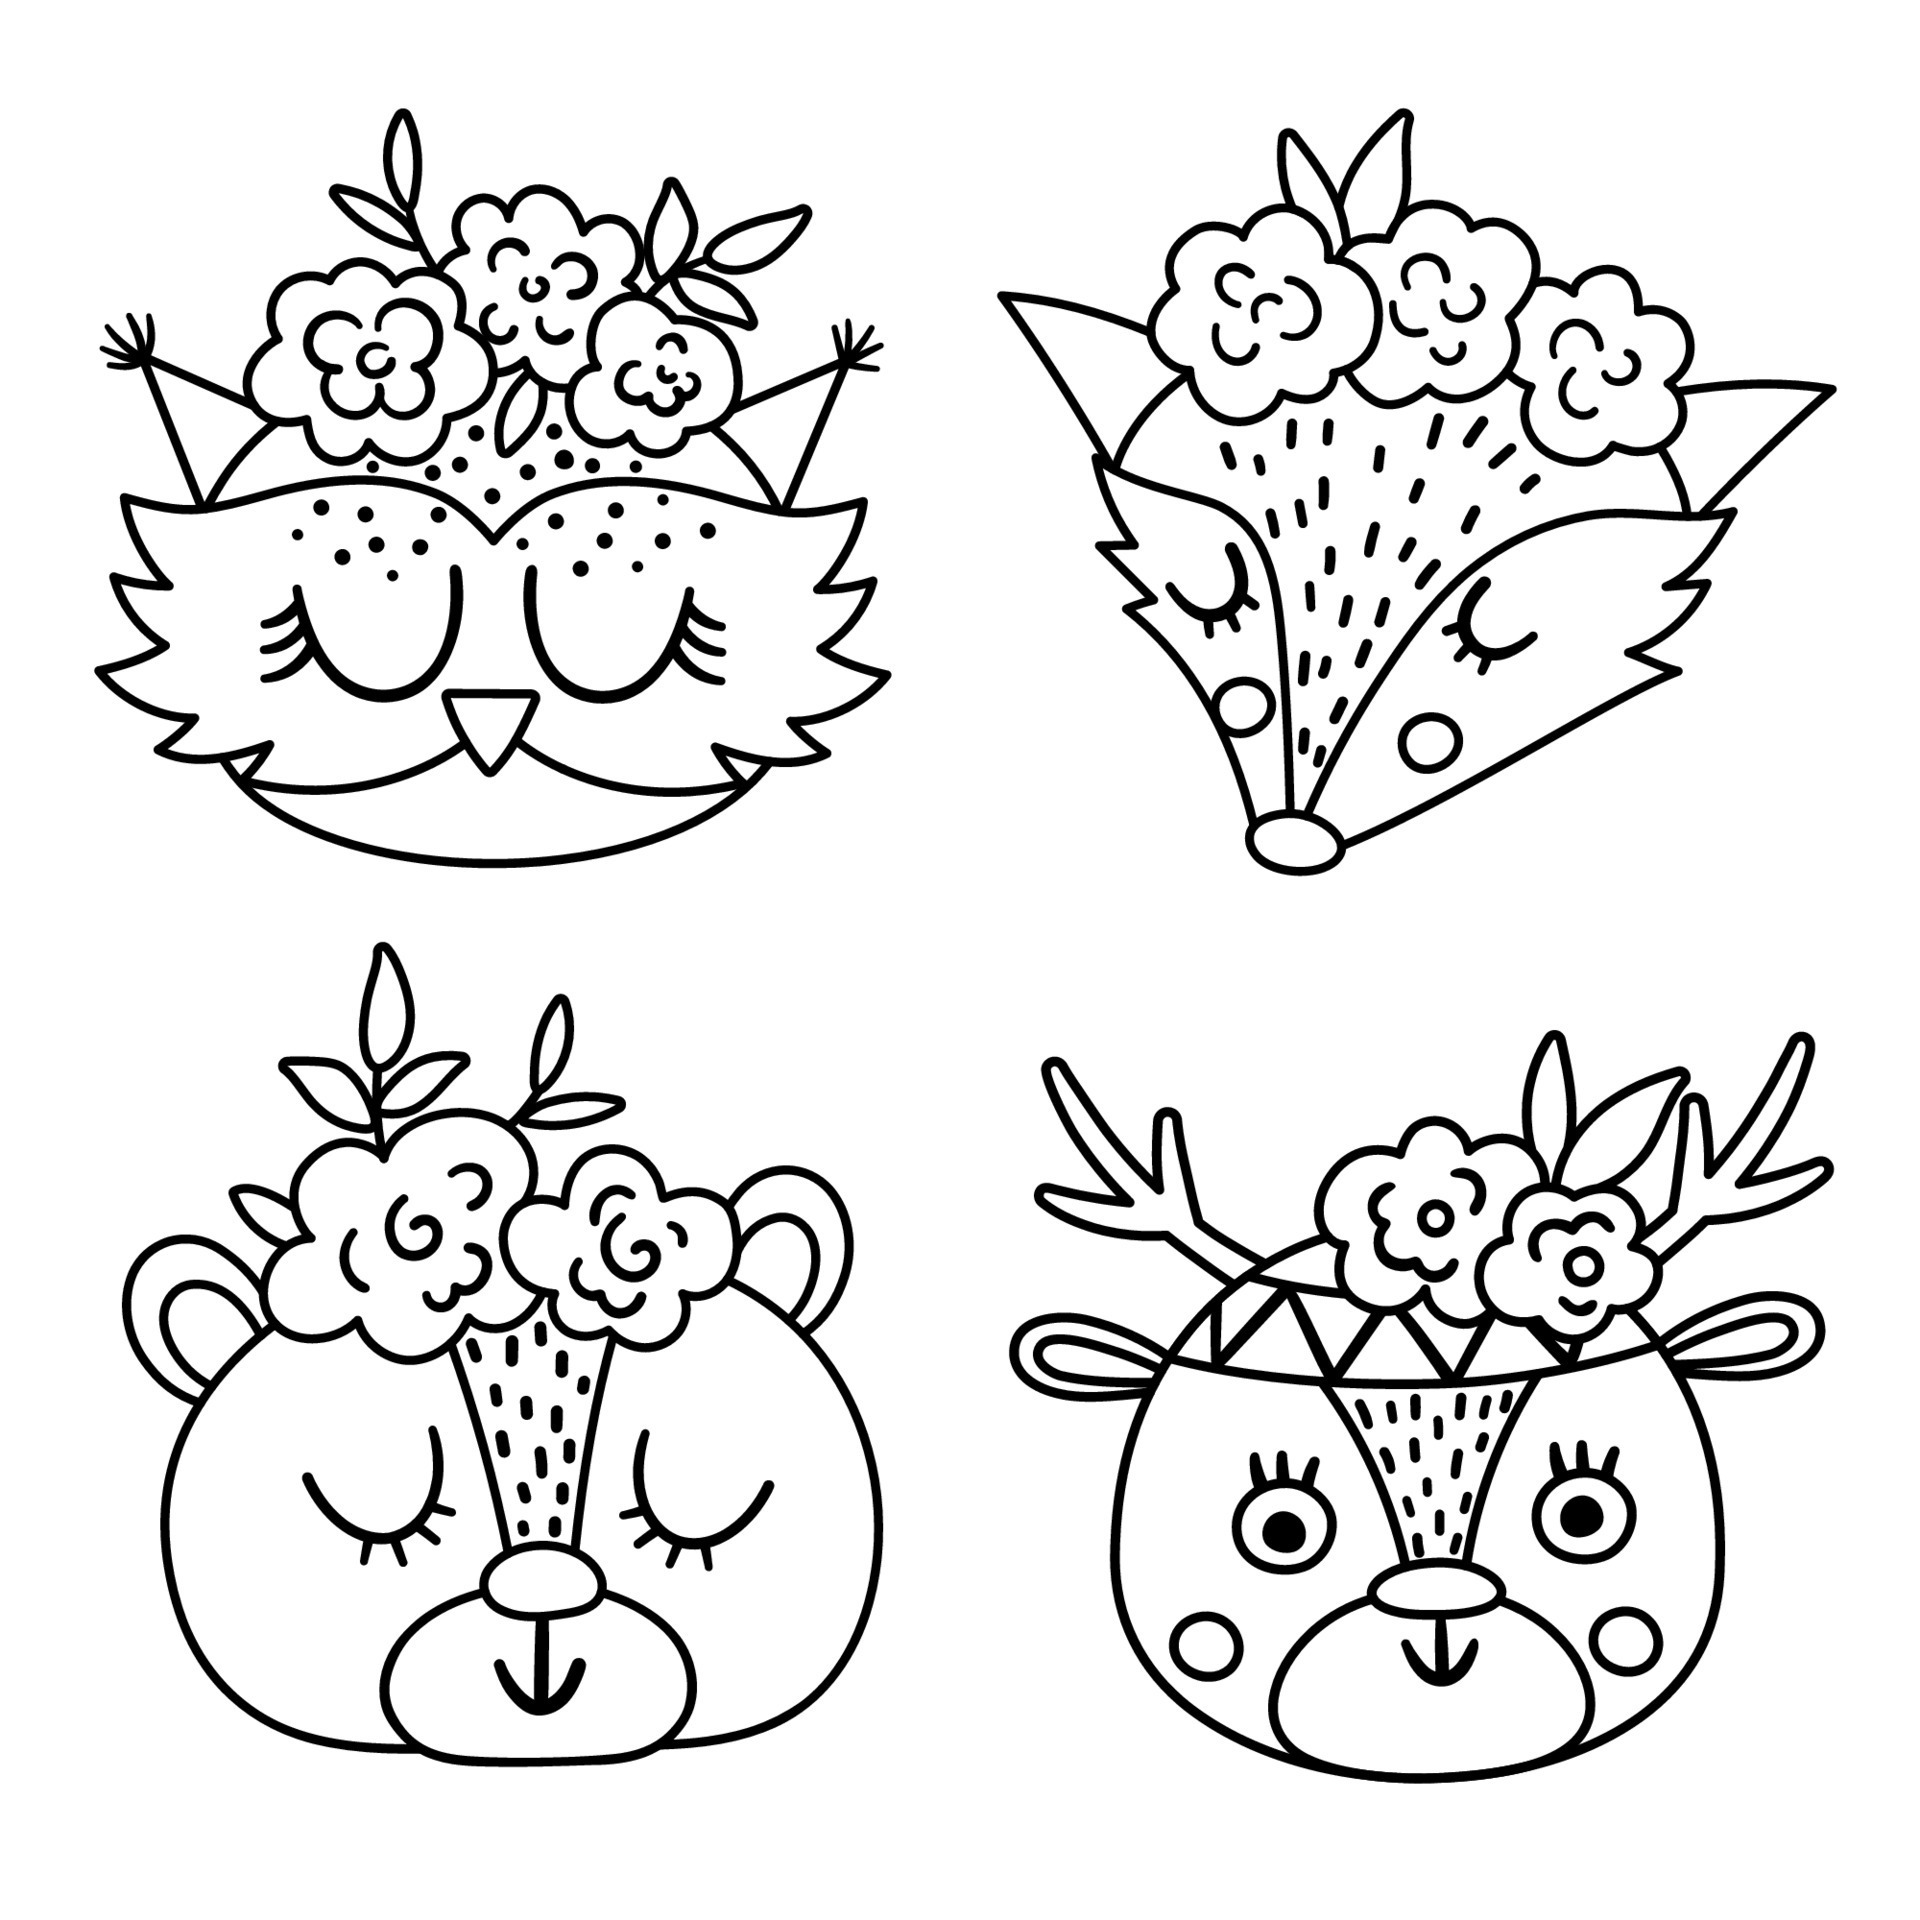 Set of vector cute wild animal black and white faces with flowers on their  heads. Boho forest avatars collection. Funny line illustration of owl,  bear, deer, fox for kids. Woodland icons pack